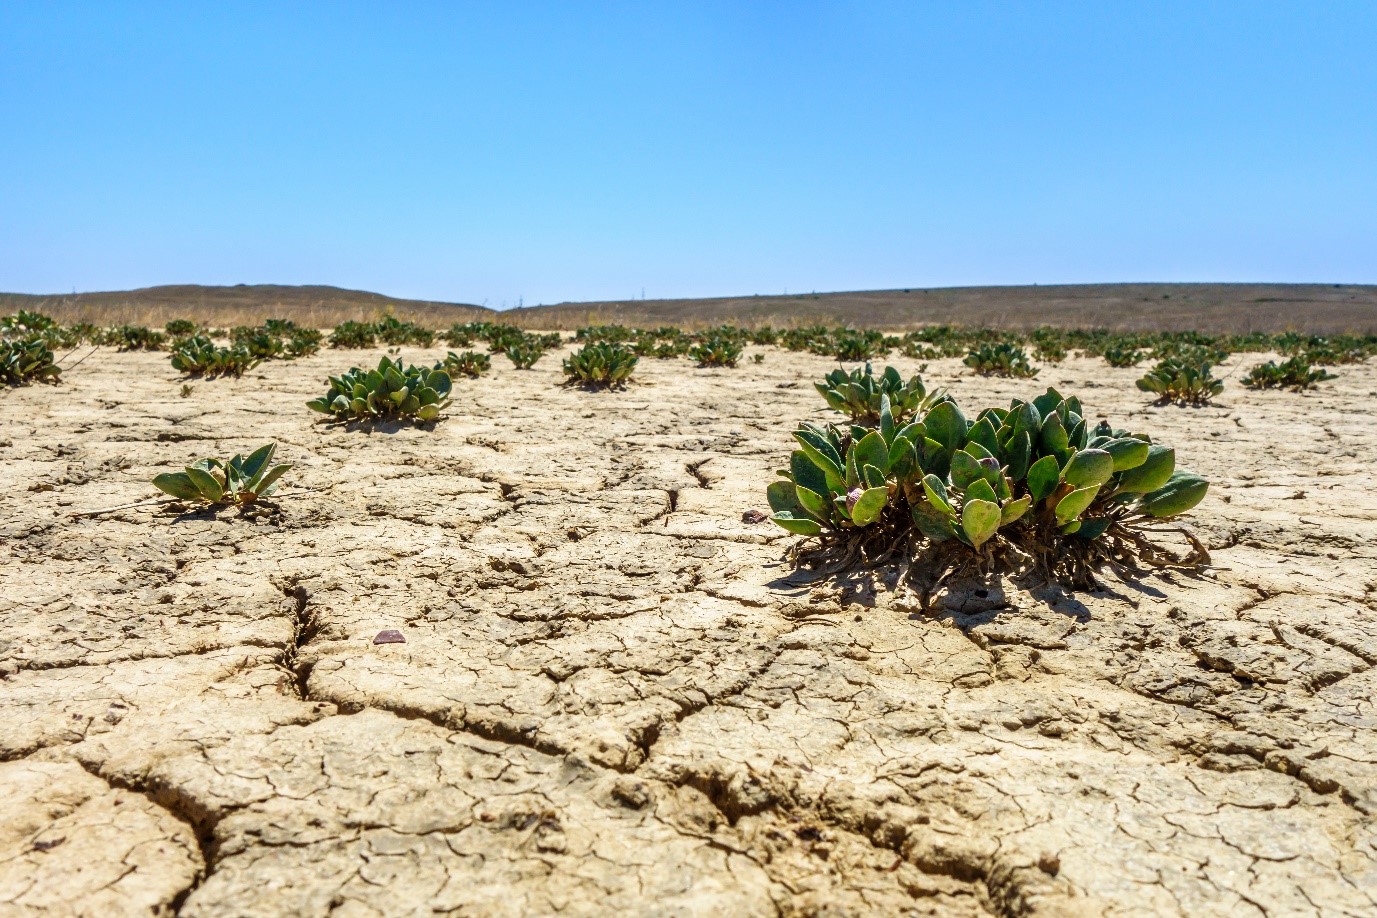 Nitric oxide regulates plant responses to drought, salinity, and heavy metal stress